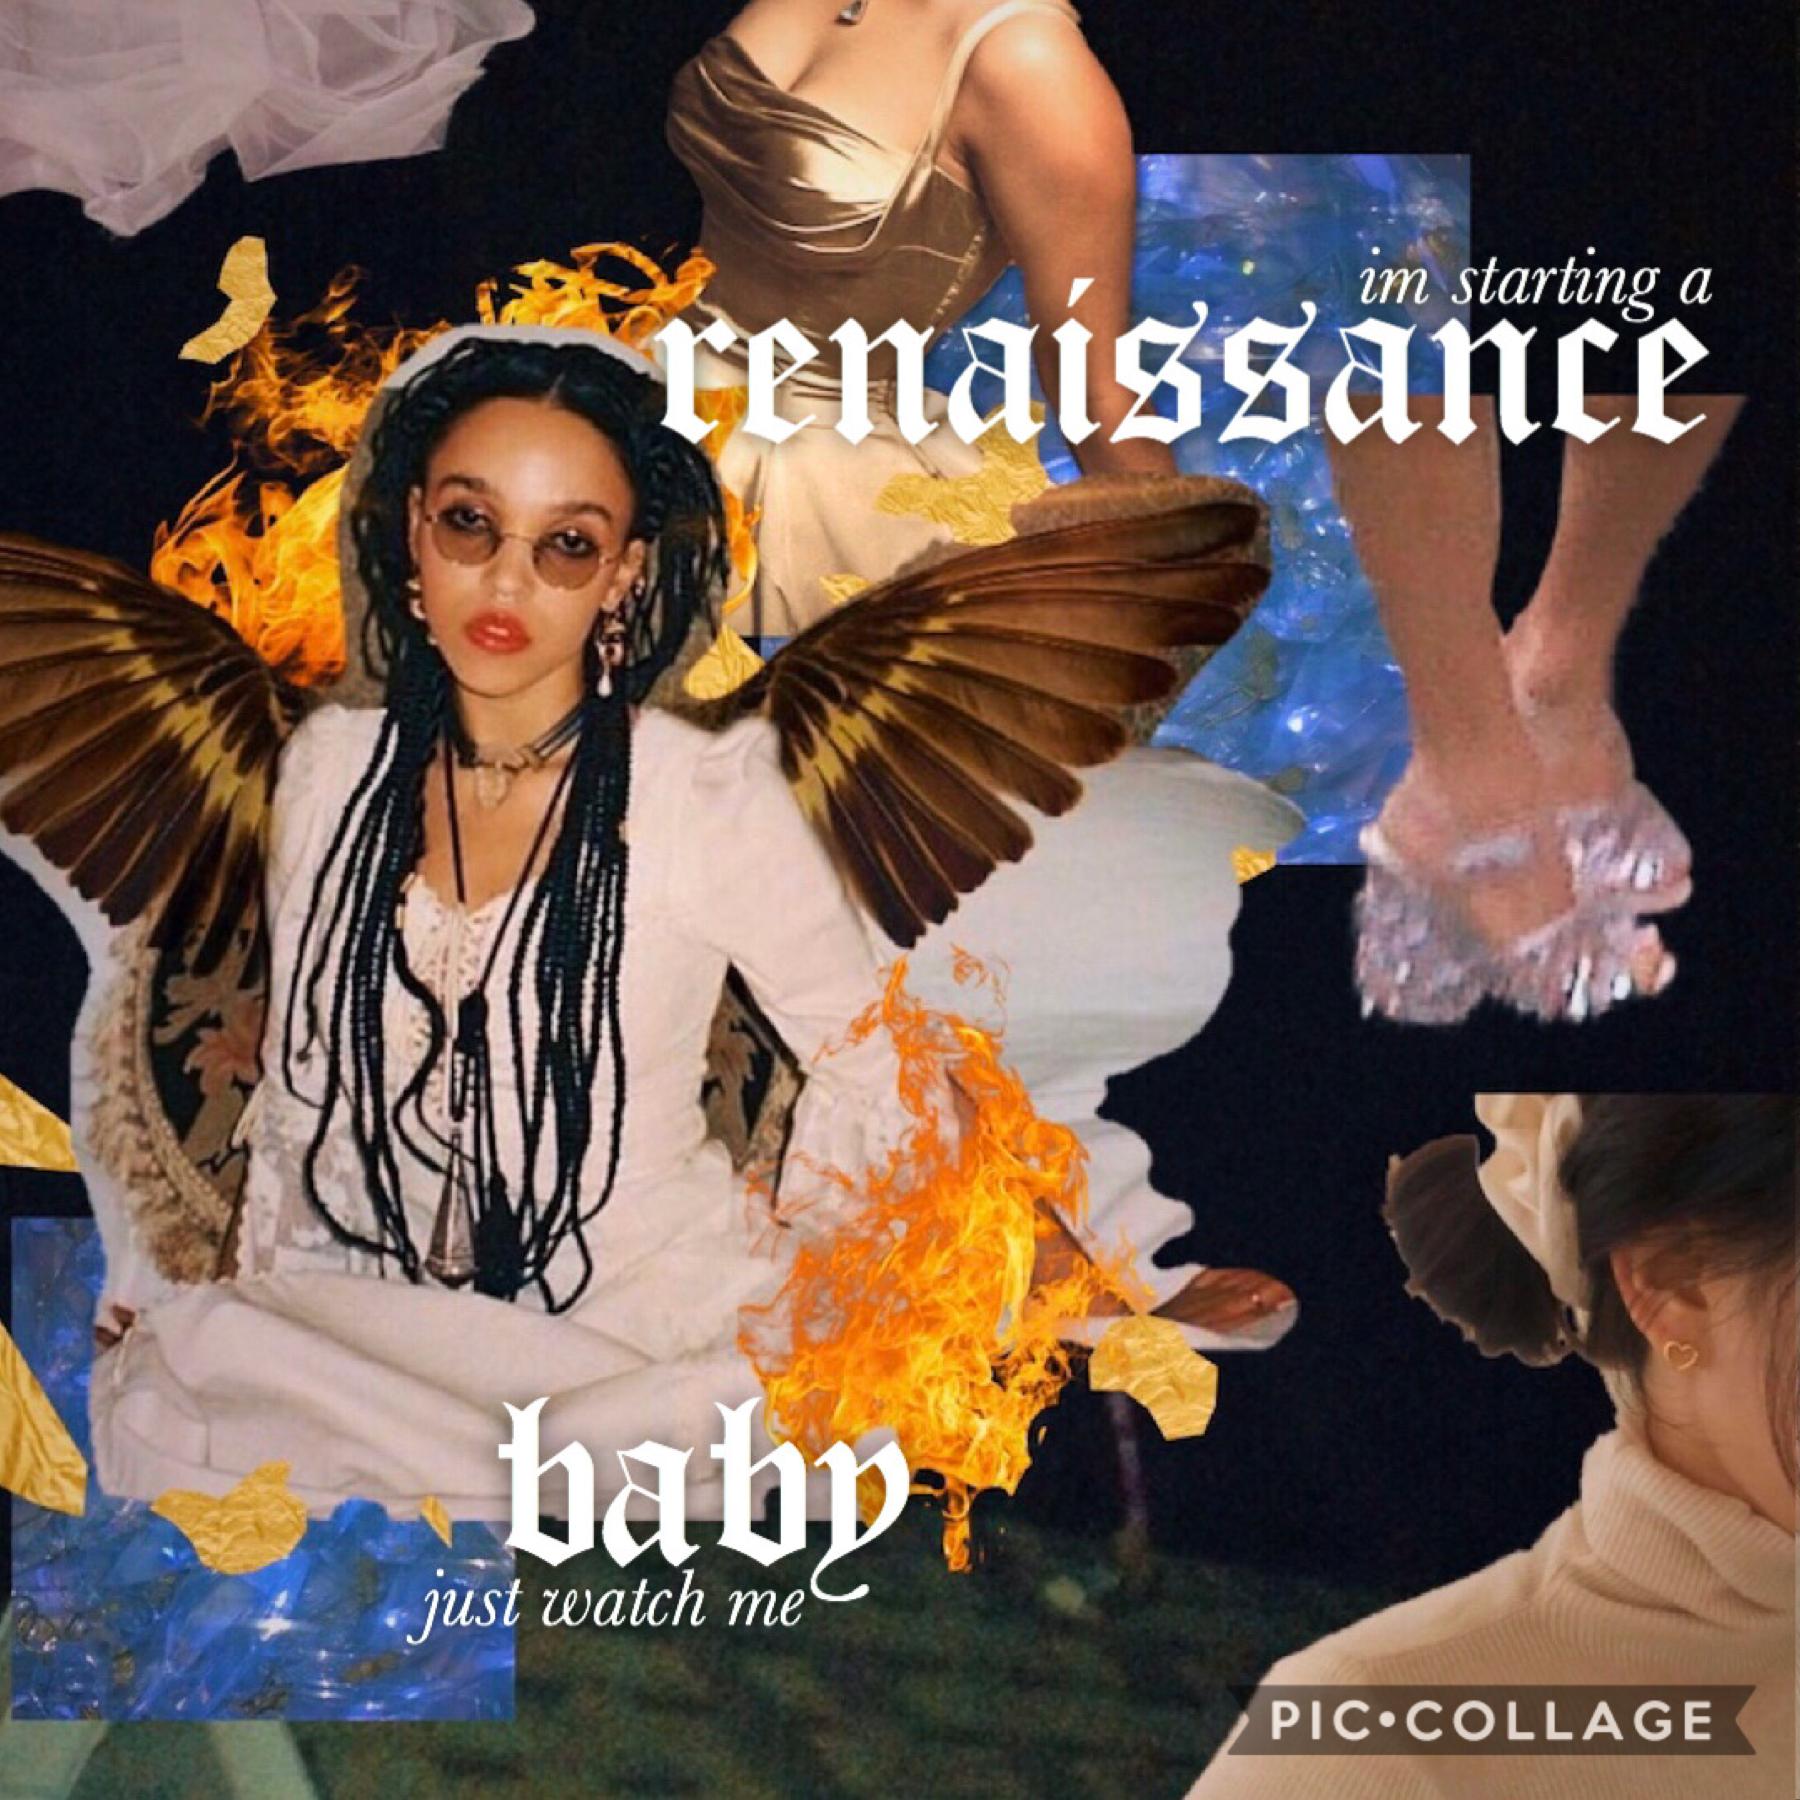 🔥requested by...🔥

@braindead_

this is a birthday edit for avery of fka twigs🎂

drop ur birthdays so i don’t miss any of them or if you guys want a custom collage😅🎂

brady, becca, and chloe if u guys want one lmk💗